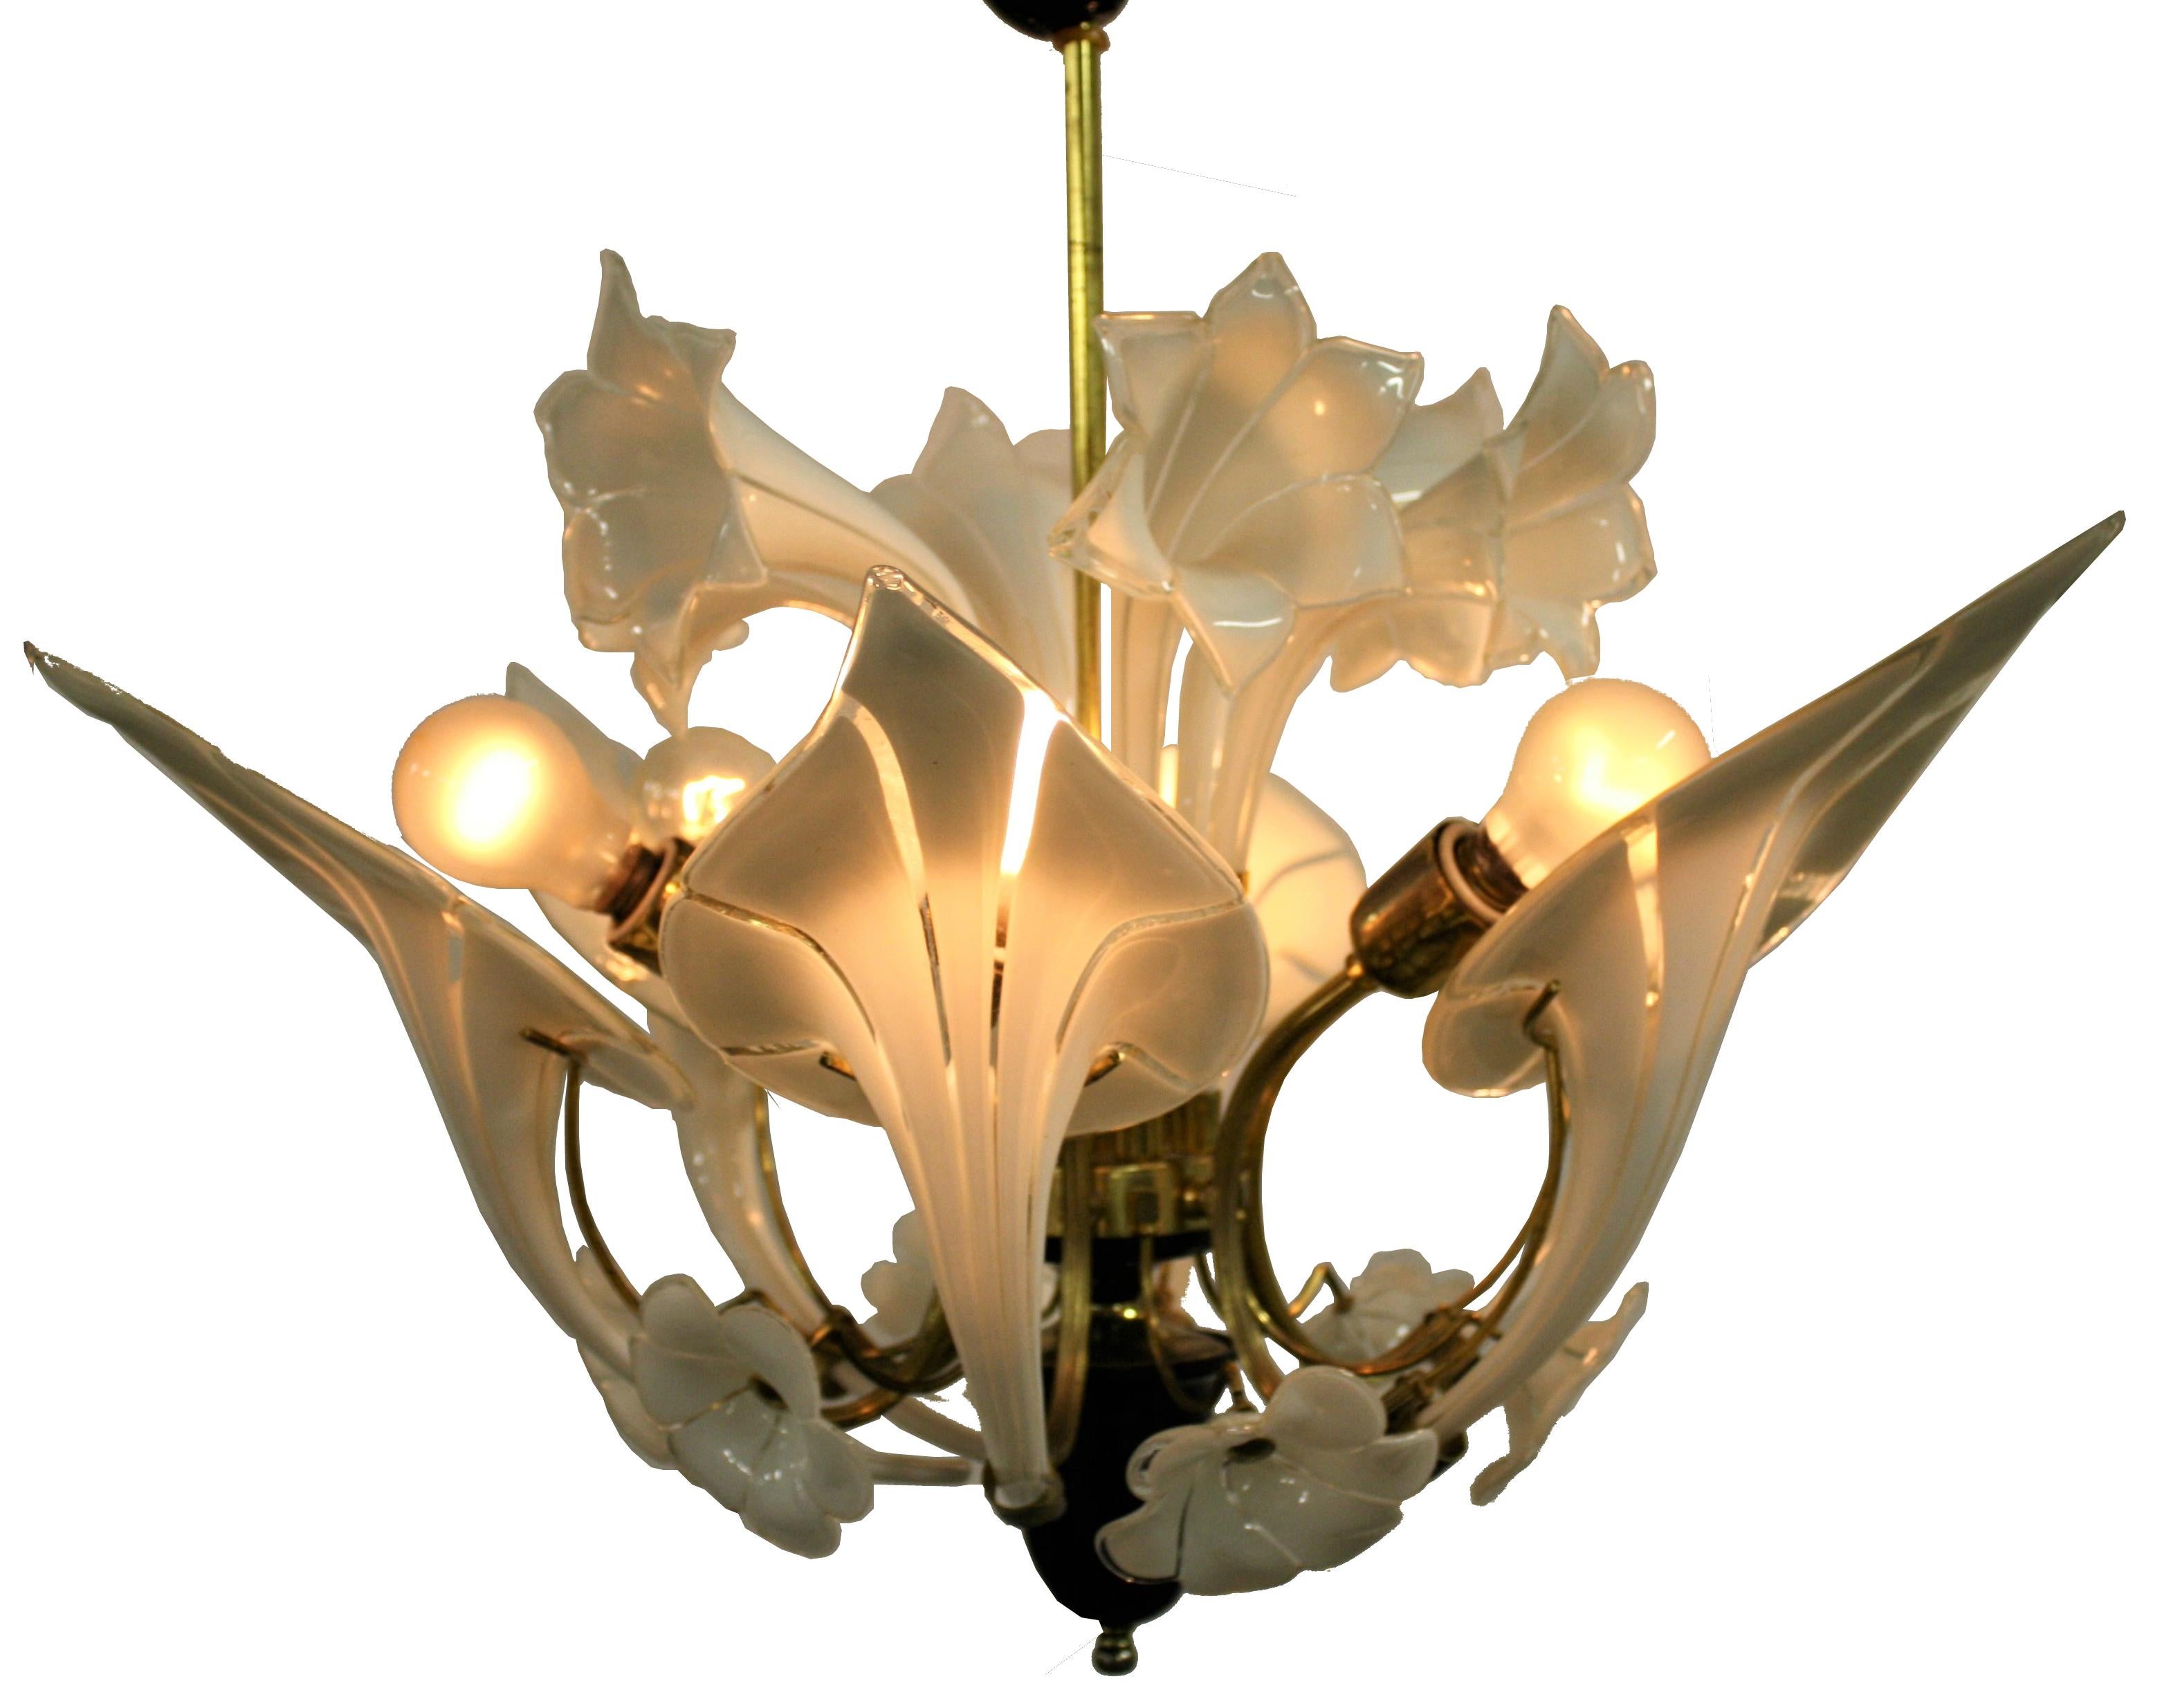 Immaculate midcentury flower chandelier made from clear on white Murano glass mounted in a 24-karat gold-plated brass armature.

Beautiful handblown flower sculptures in different shapes make the chandelier wonderful to look at.

Once